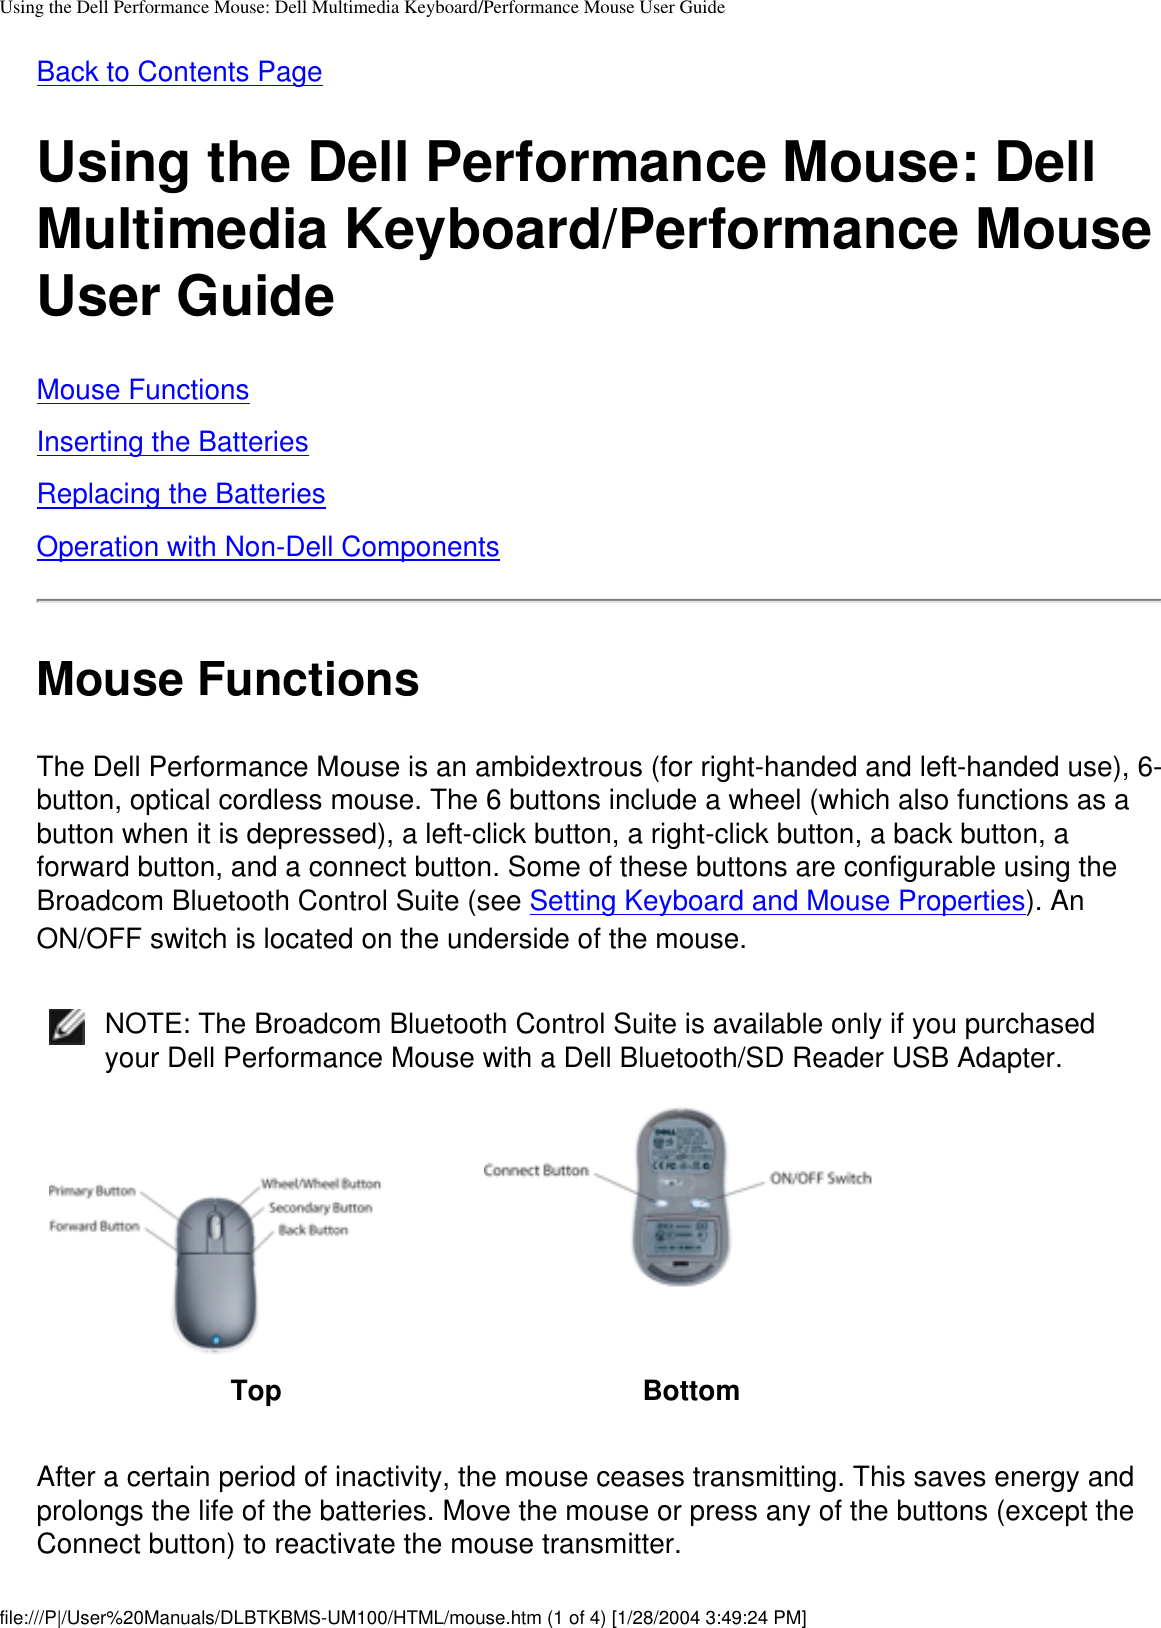 Using the Dell Performance Mouse: Dell Multimedia Keyboard/Performance Mouse User GuideBack to Contents PageUsing the Dell Performance Mouse: Dell Multimedia Keyboard/Performance Mouse User GuideMouse FunctionsInserting the BatteriesReplacing the BatteriesOperation with Non-Dell ComponentsMouse FunctionsThe Dell Performance Mouse is an ambidextrous (for right-handed and left-handed use), 6-button, optical cordless mouse. The 6 buttons include a wheel (which also functions as a button when it is depressed), a left-click button, a right-click button, a back button, a forward button, and a connect button. Some of these buttons are configurable using the Broadcom Bluetooth Control Suite (see Setting Keyboard and Mouse Properties). An ON/OFF switch is located on the underside of the mouse.NOTE: The Broadcom Bluetooth Control Suite is available only if you purchased your Dell Performance Mouse with a Dell Bluetooth/SD Reader USB Adapter.Top BottomAfter a certain period of inactivity, the mouse ceases transmitting. This saves energy and prolongs the life of the batteries. Move the mouse or press any of the buttons (except the Connect button) to reactivate the mouse transmitter.file:///P|/User%20Manuals/DLBTKBMS-UM100/HTML/mouse.htm (1 of 4) [1/28/2004 3:49:24 PM]